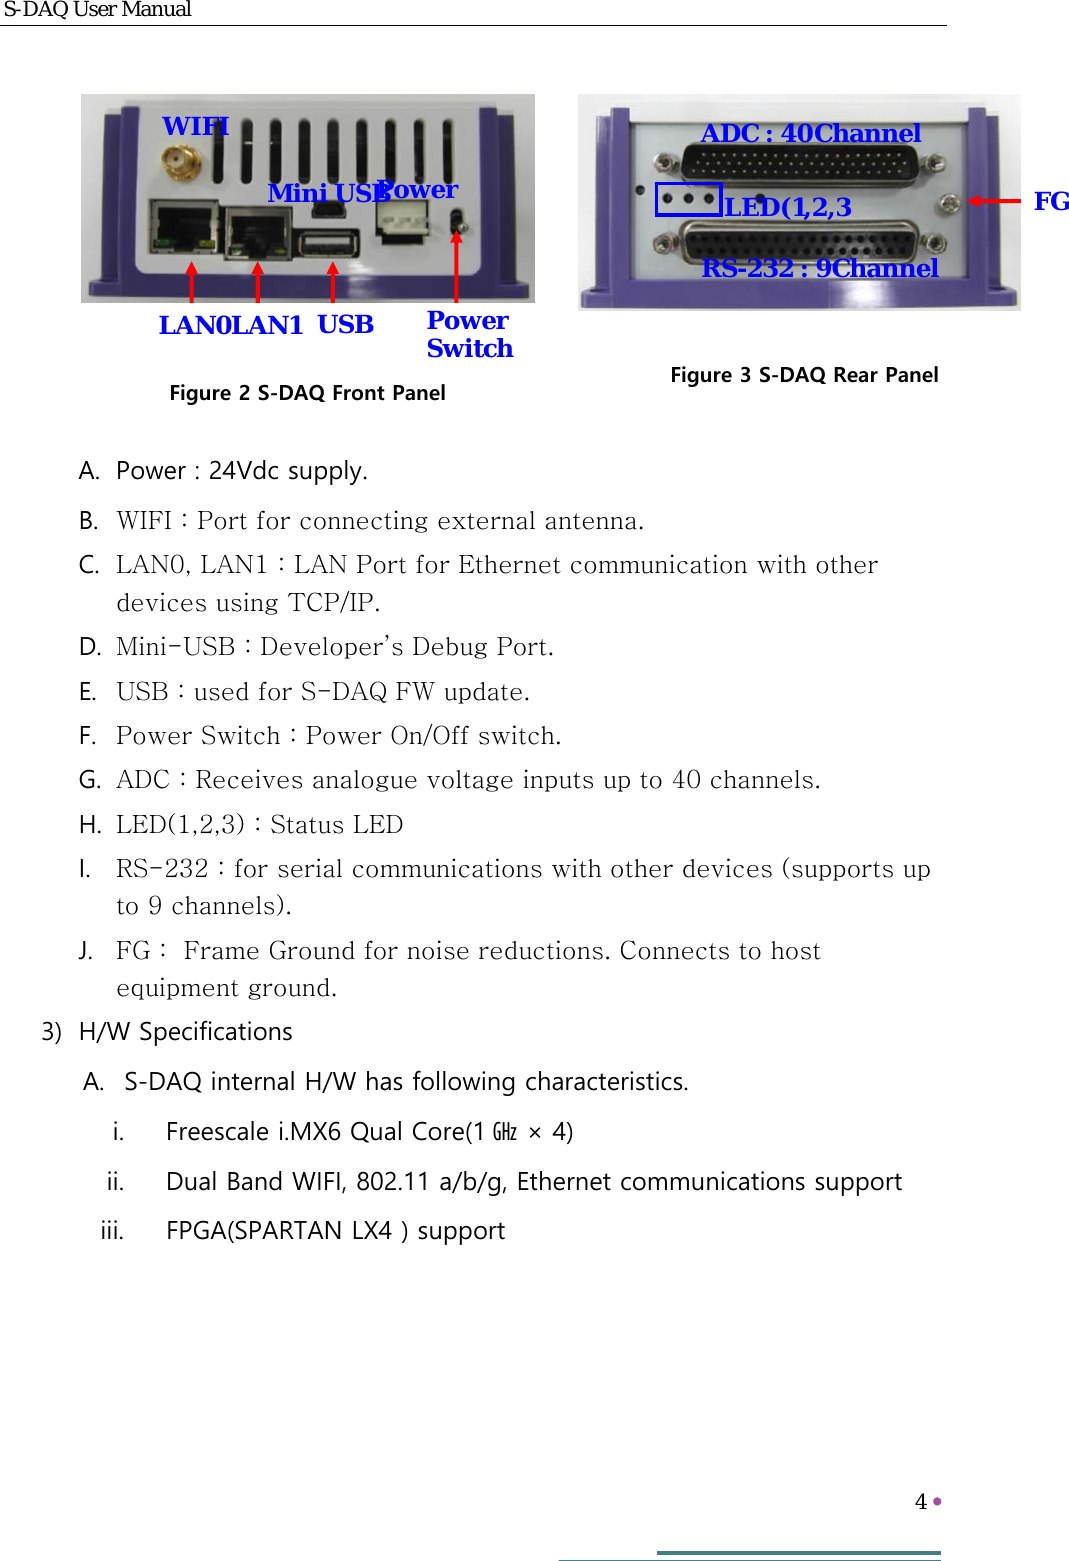 S-DAQ User Manual   4     WIFILAN0LAN1 USBPowerPower SwitchMini USB FGADC : 40ChannelRS-232 : 9ChannelLED(1,2,3     A. Power : 24Vdc supply. B. WIFI : Port for connecting external antenna. C. LAN0, LAN1 : LAN Port for Ethernet communication with other devices using TCP/IP. D. Mini-USB : Developer’s Debug Port. E. USB : used for S-DAQ FW update. F. Power Switch : Power On/Off switch. G. ADC : Receives analogue voltage inputs up to 40 channels. H. LED(1,2,3) : Status LED I. RS-232 : for serial communications with other devices (supports up to 9 channels). J. FG :  Frame Ground for noise reductions. Connects to host equipment ground. 3) H/W Specifications A. S-DAQ internal H/W has following characteristics. i. Freescale i.MX6 Qual Core(1 ㎓ × 4) ii. Dual Band WIFI, 802.11 a/b/g, Ethernet communications support iii. FPGA(SPARTAN LX4 ) support   Figure 2 S-DAQ Front Panel Figure 3 S-DAQ Rear Panel